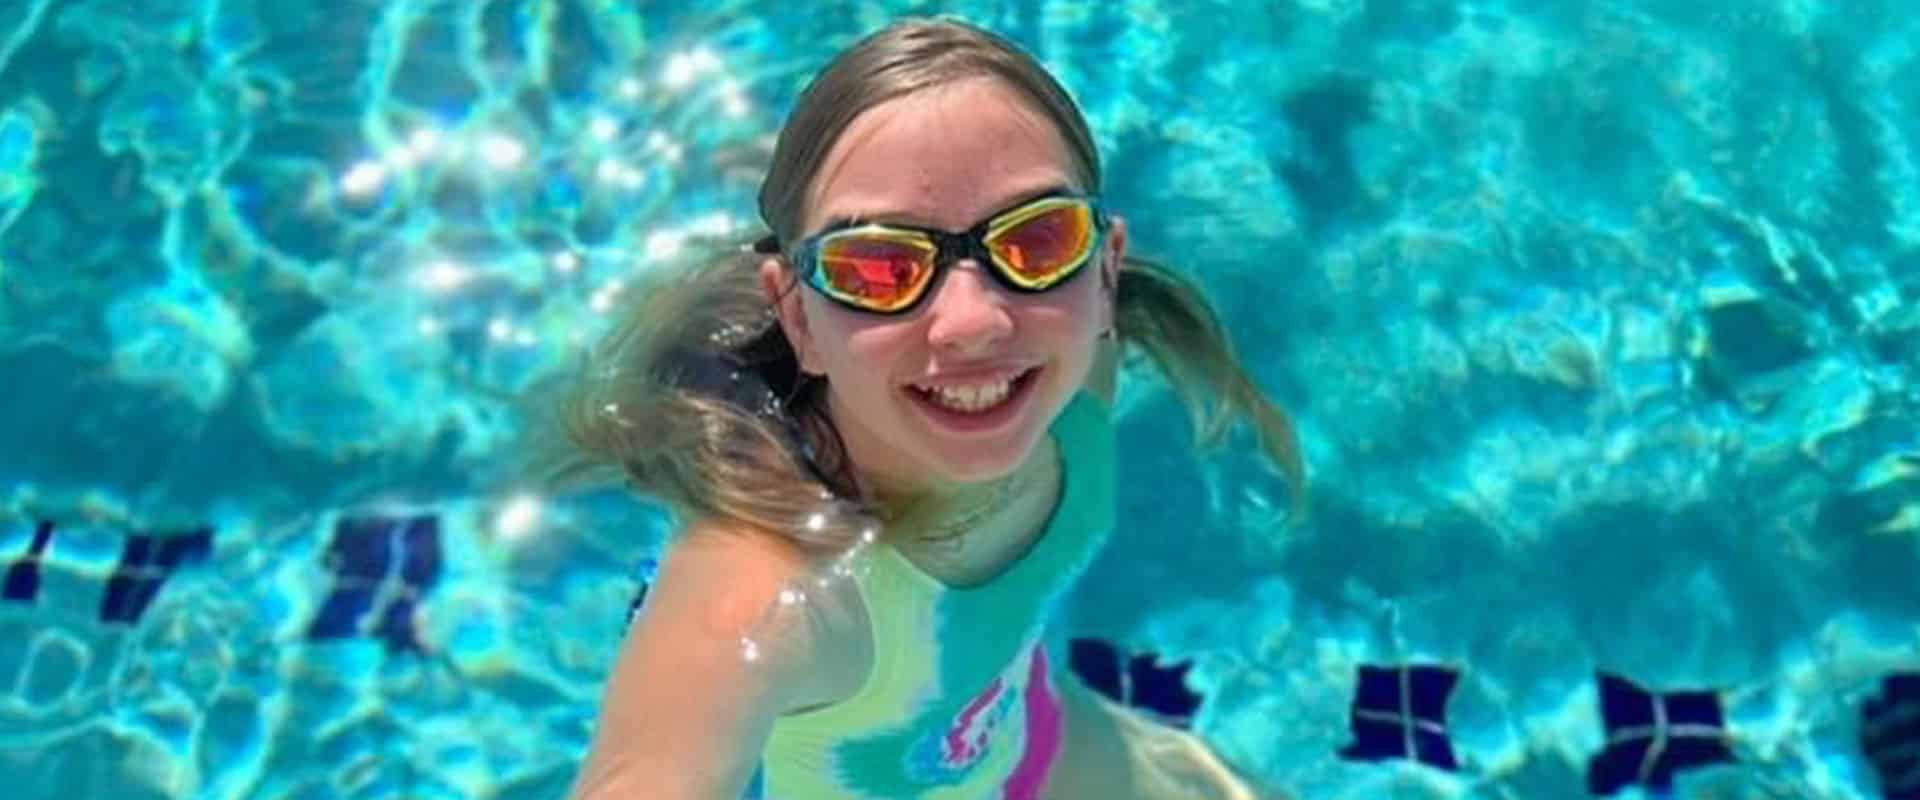 Young Girl Swimming | VOS YMCA